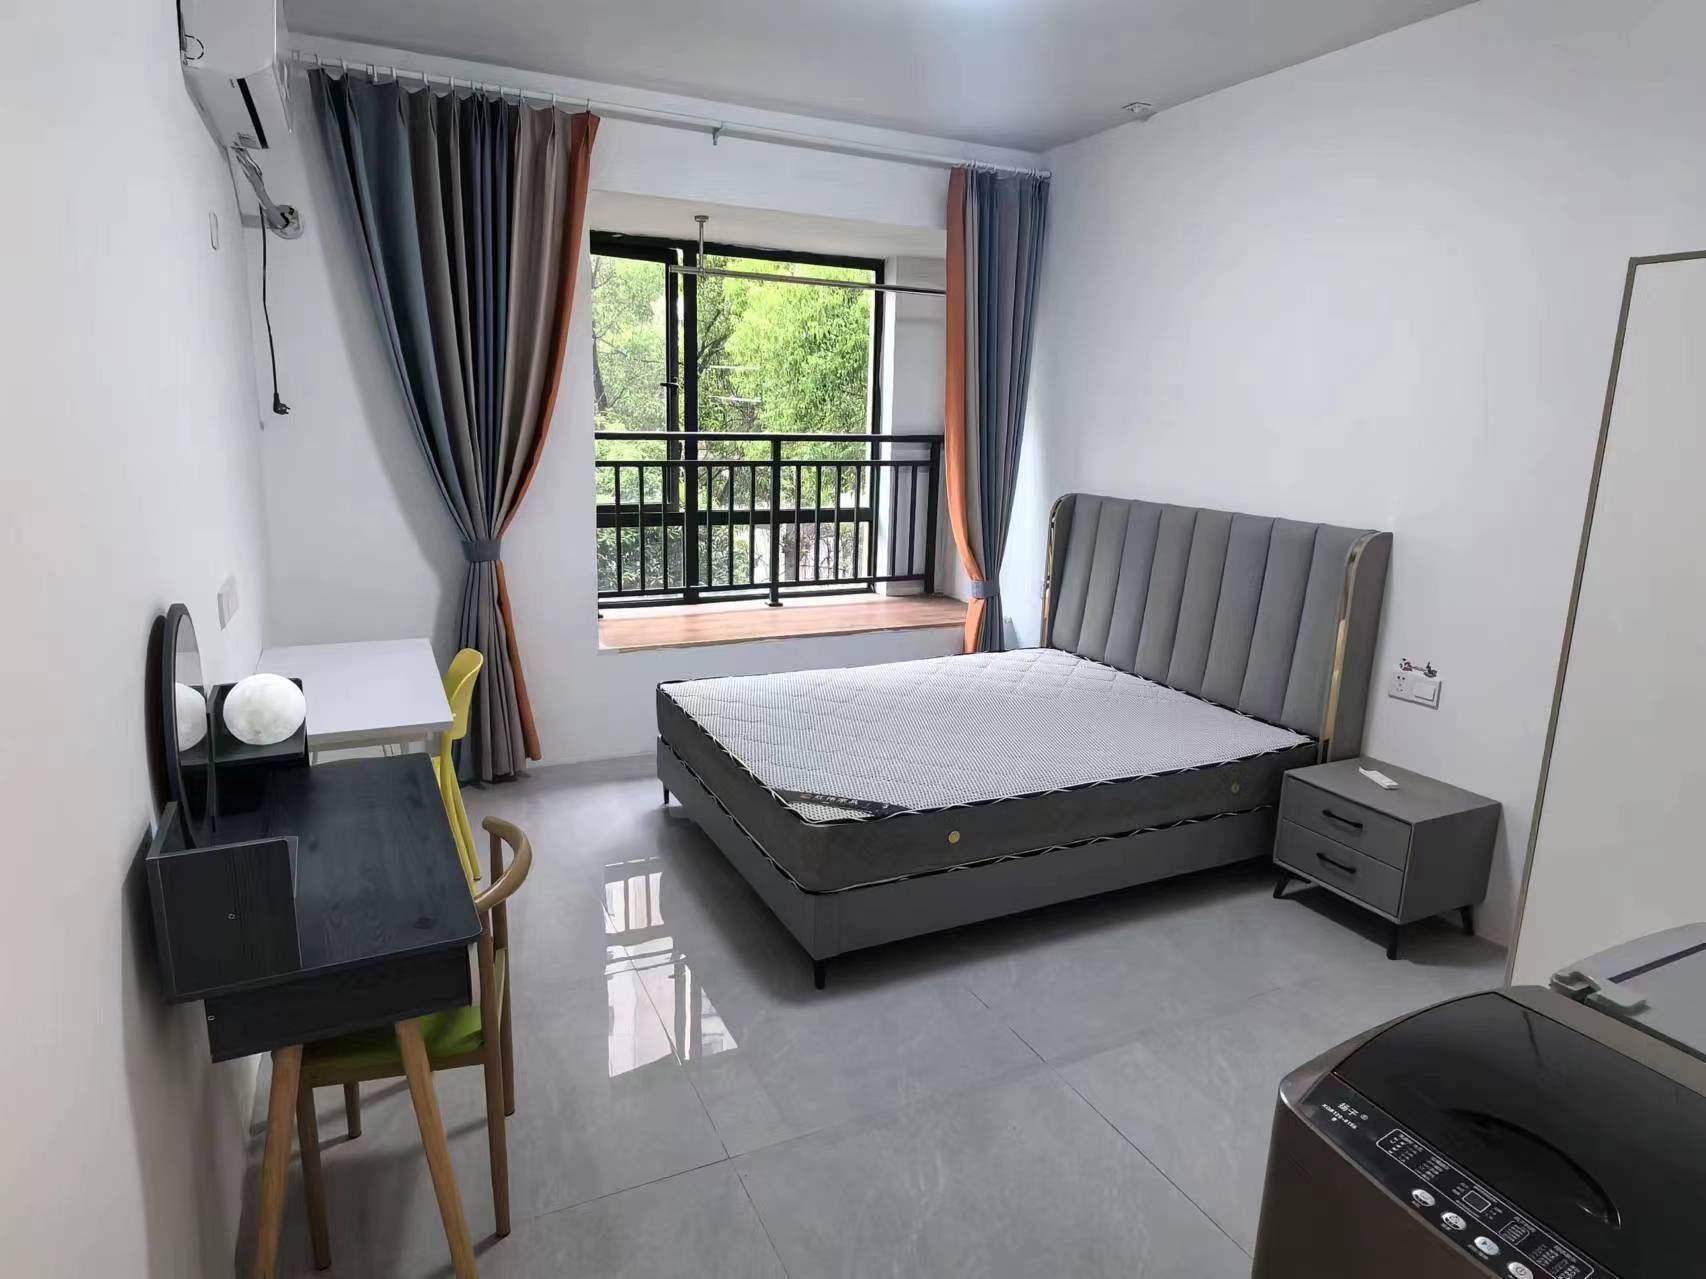 Ningbo-Haishu-Cozy Home,Clean&Comfy,No Gender Limit,Chilled